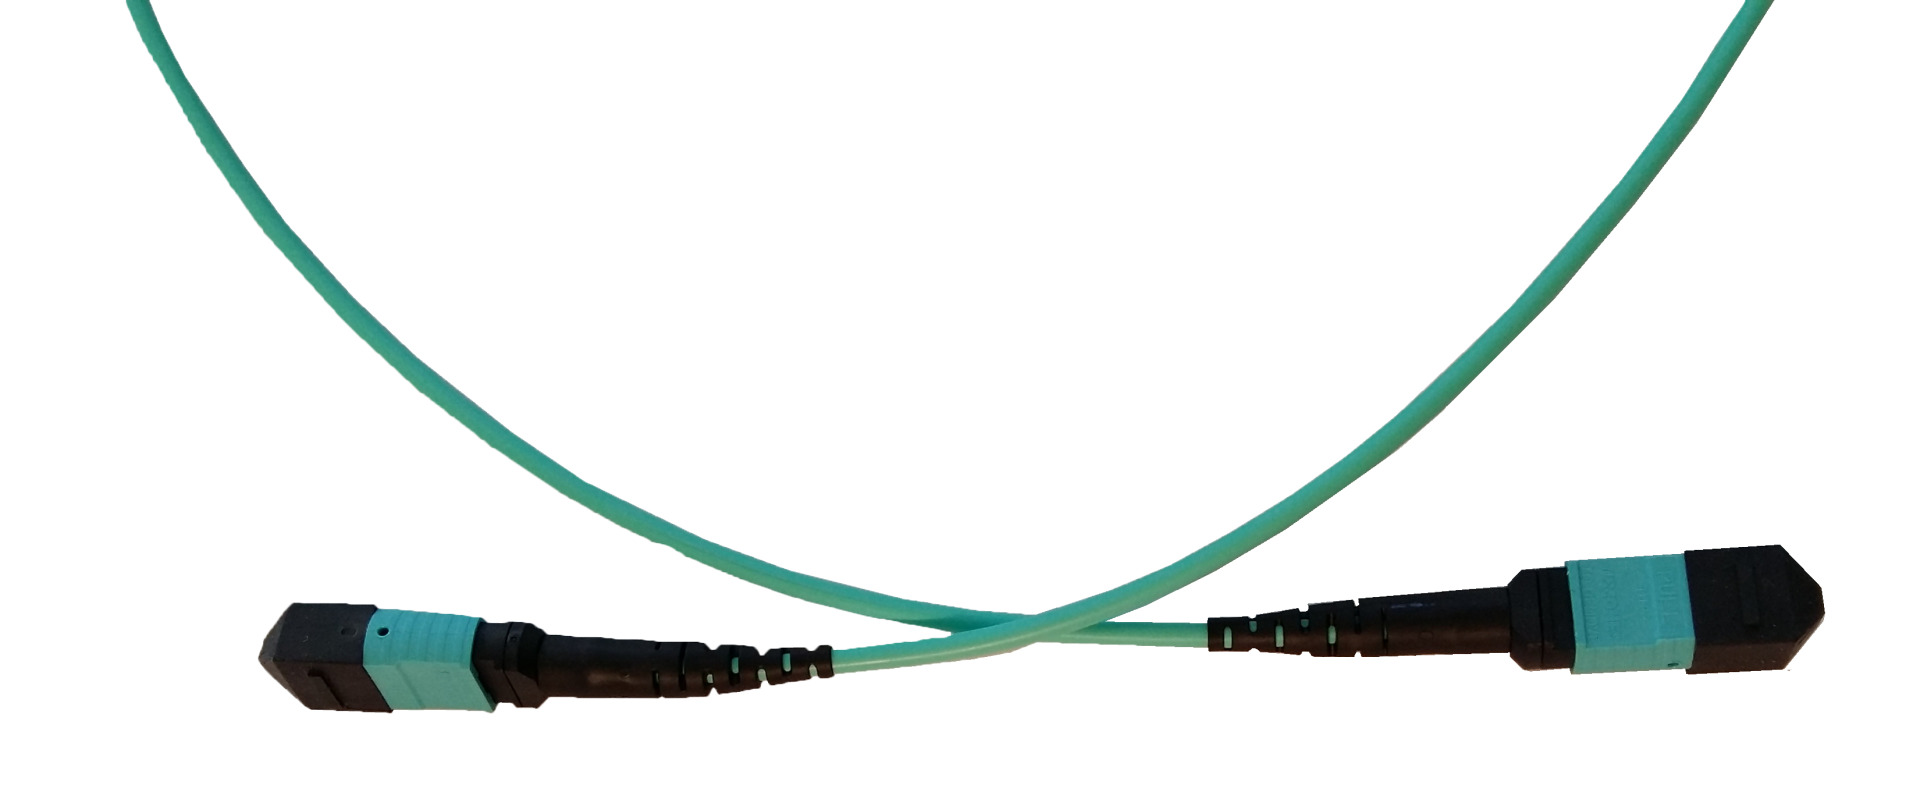 MTP/MPO Trunkcable 12 fiber MM OM3, 5m,Turquise, dobb.jacket OD=4,5mm